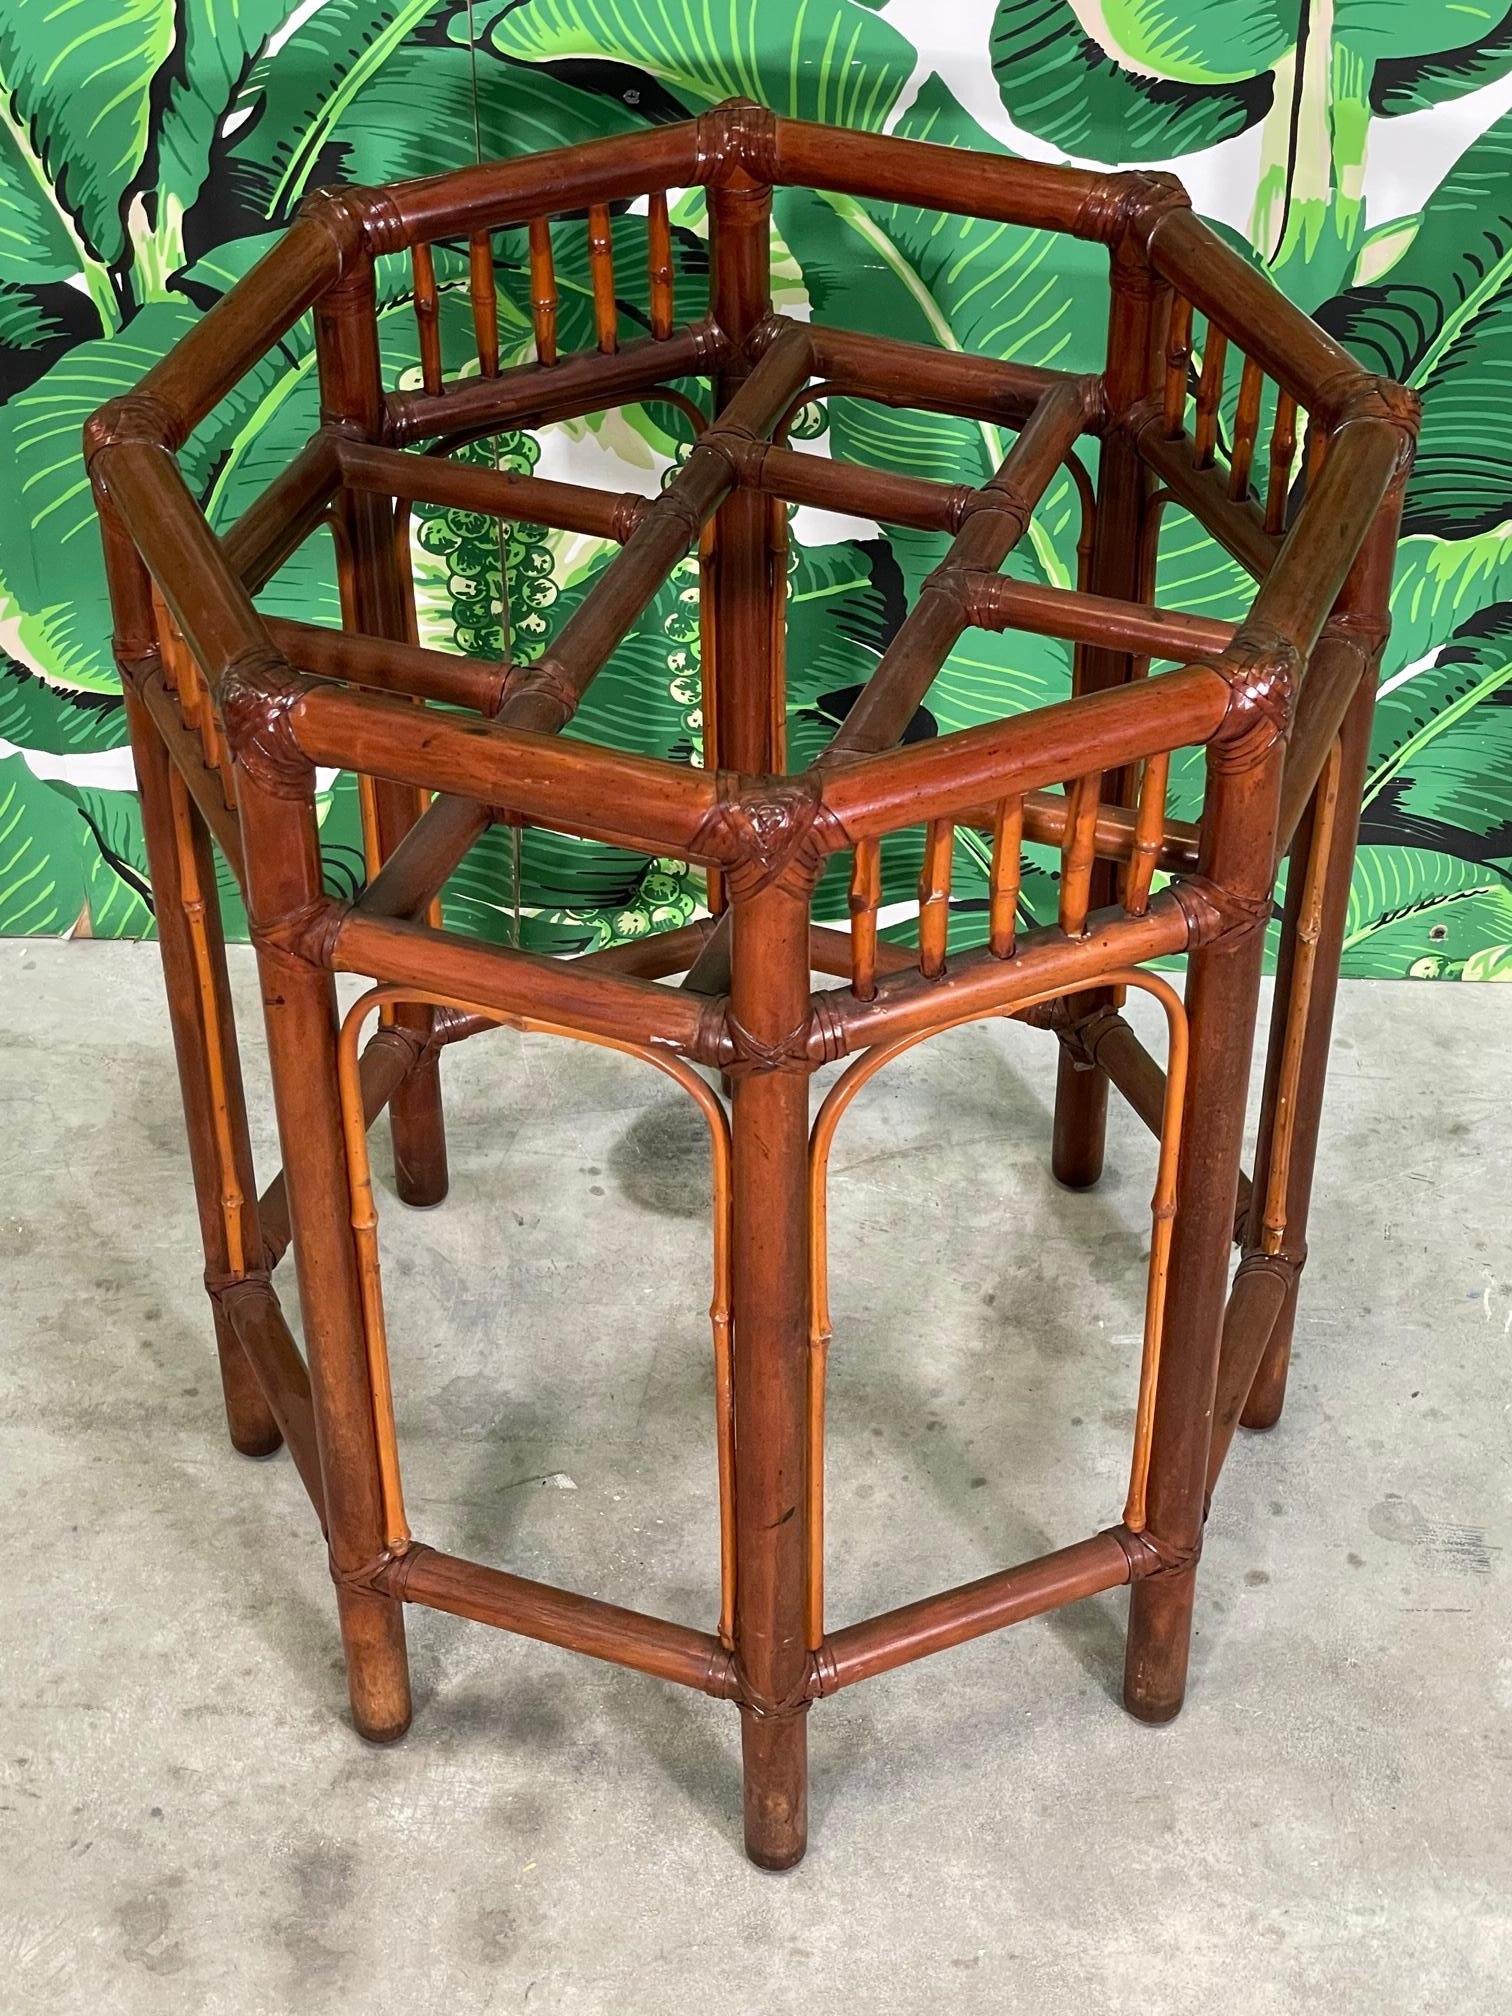 Vintage rattan dining table base features decorative fretwork and a rich, deep brown finish. Good condition with minor imperfections consistent with age (see photos).

 